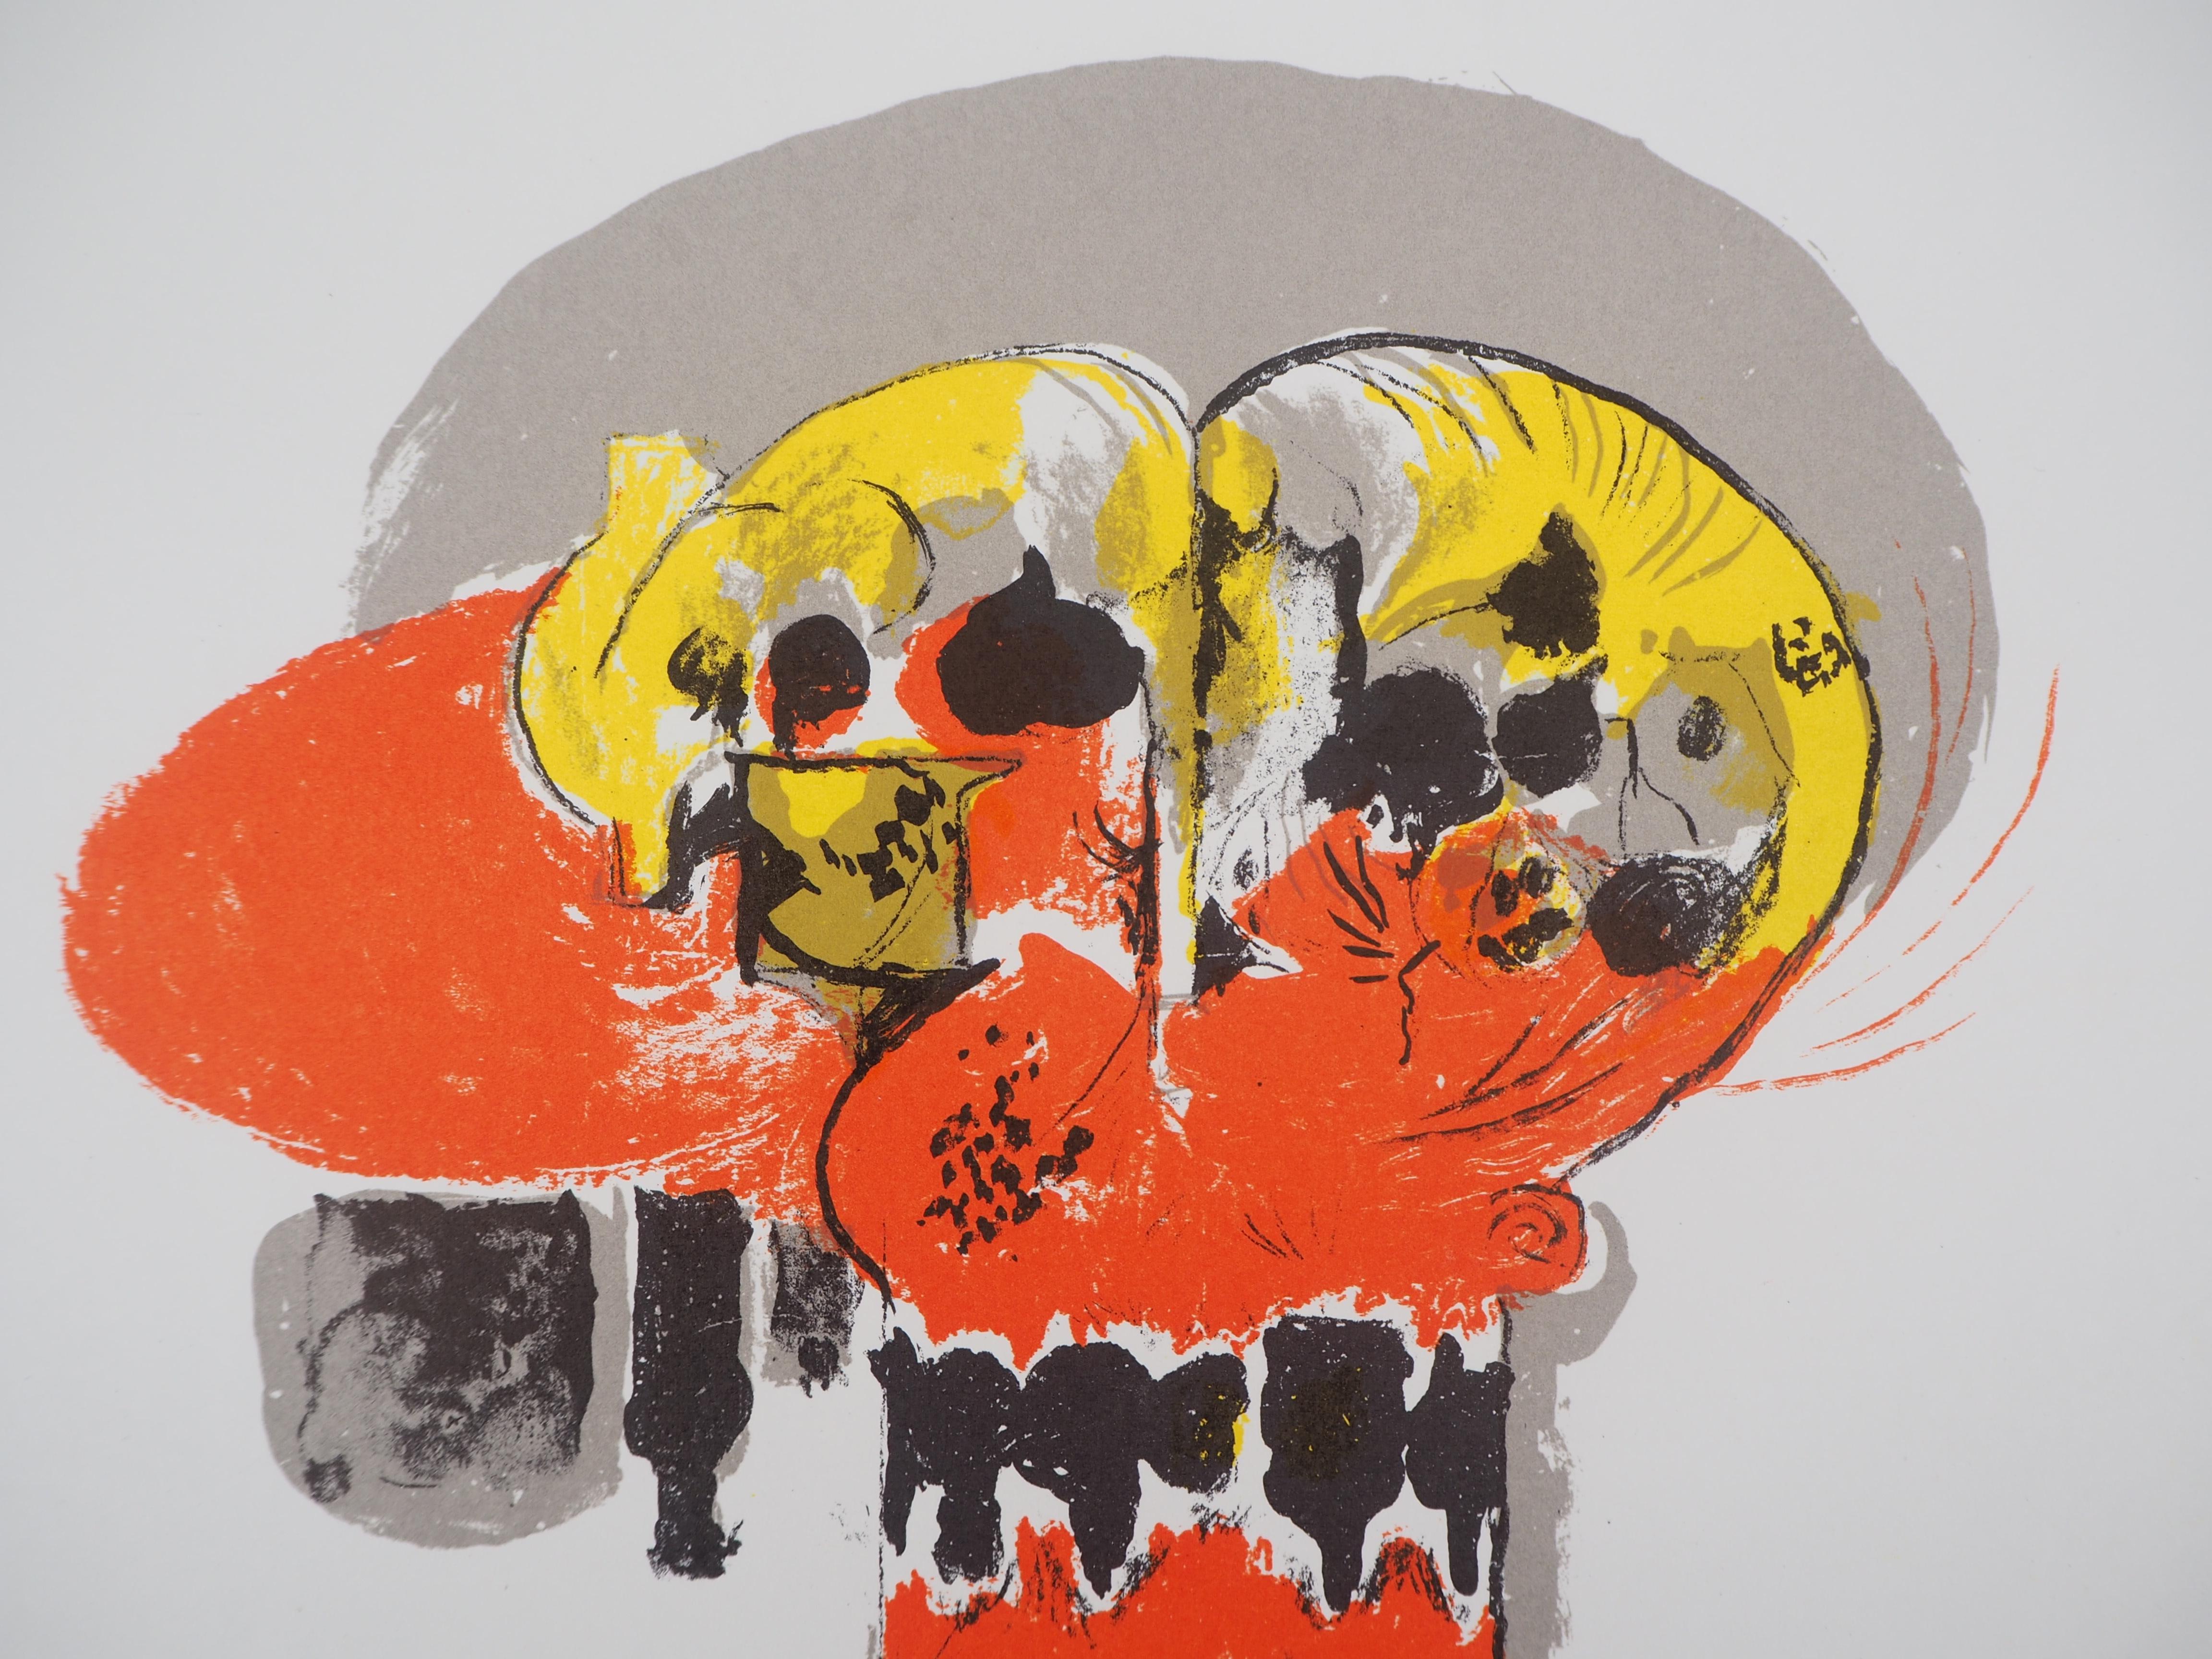 Composition with yellow and red - Original lithograph - Mourlot, 1972 - Abstract Print by Graham Sutherland